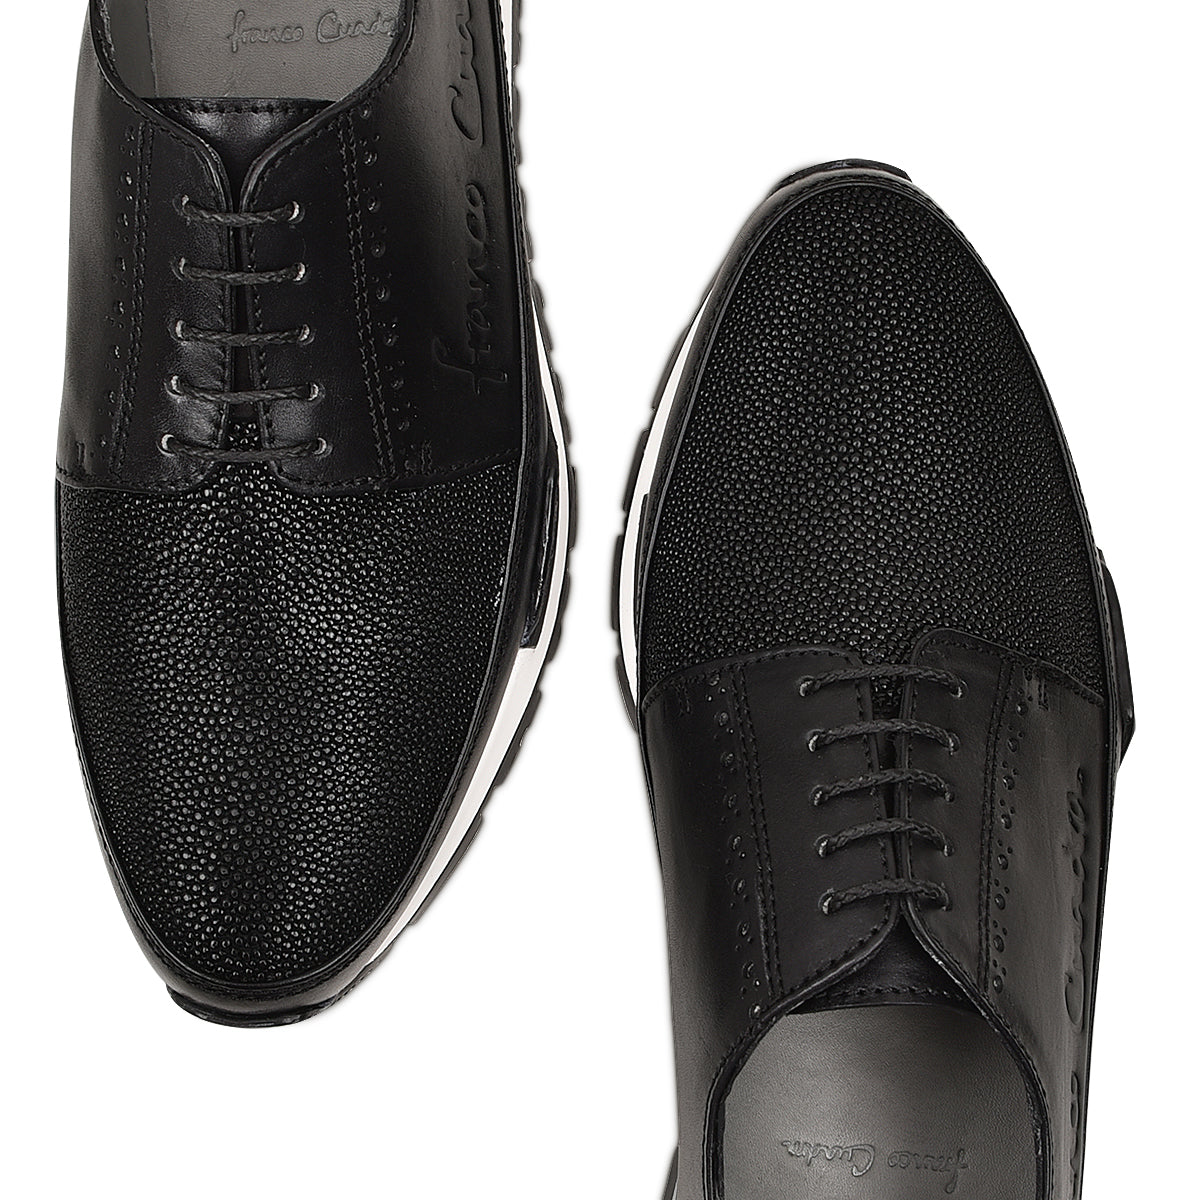 Combination of exotic leather, black bovine leather and stingray with laces